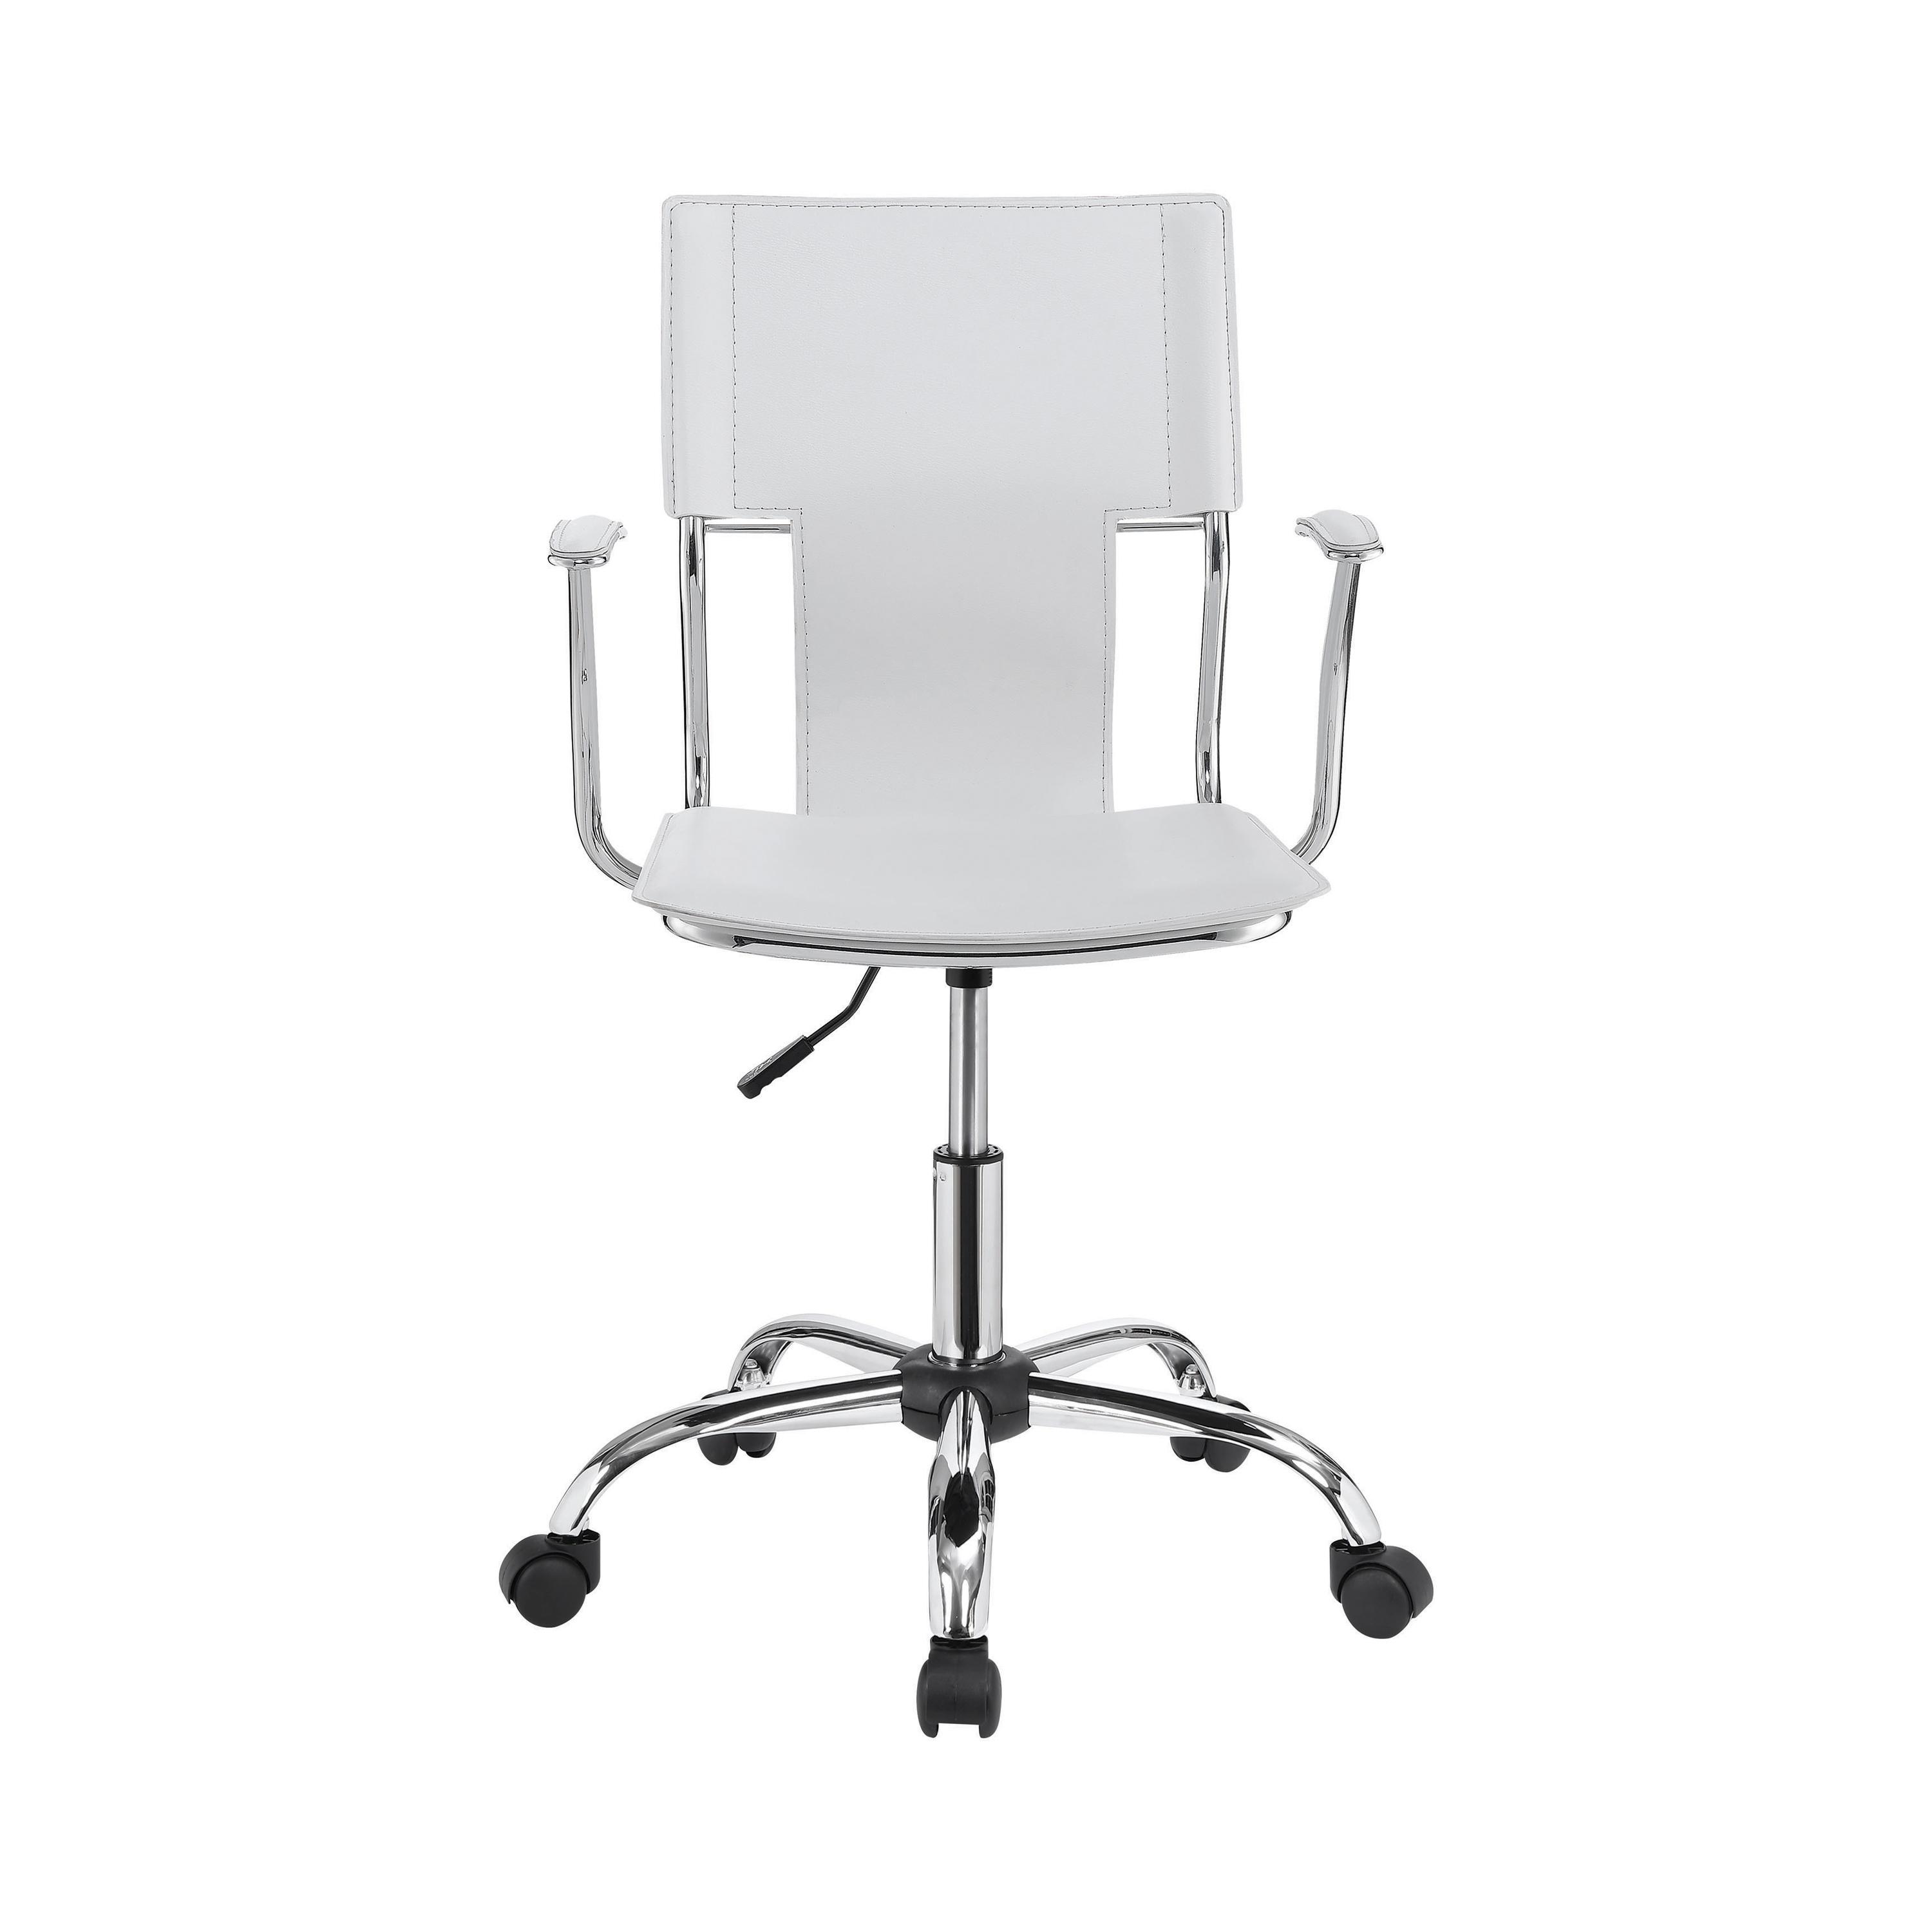 Modern Office Chair 801363 801363 in White Leatherette